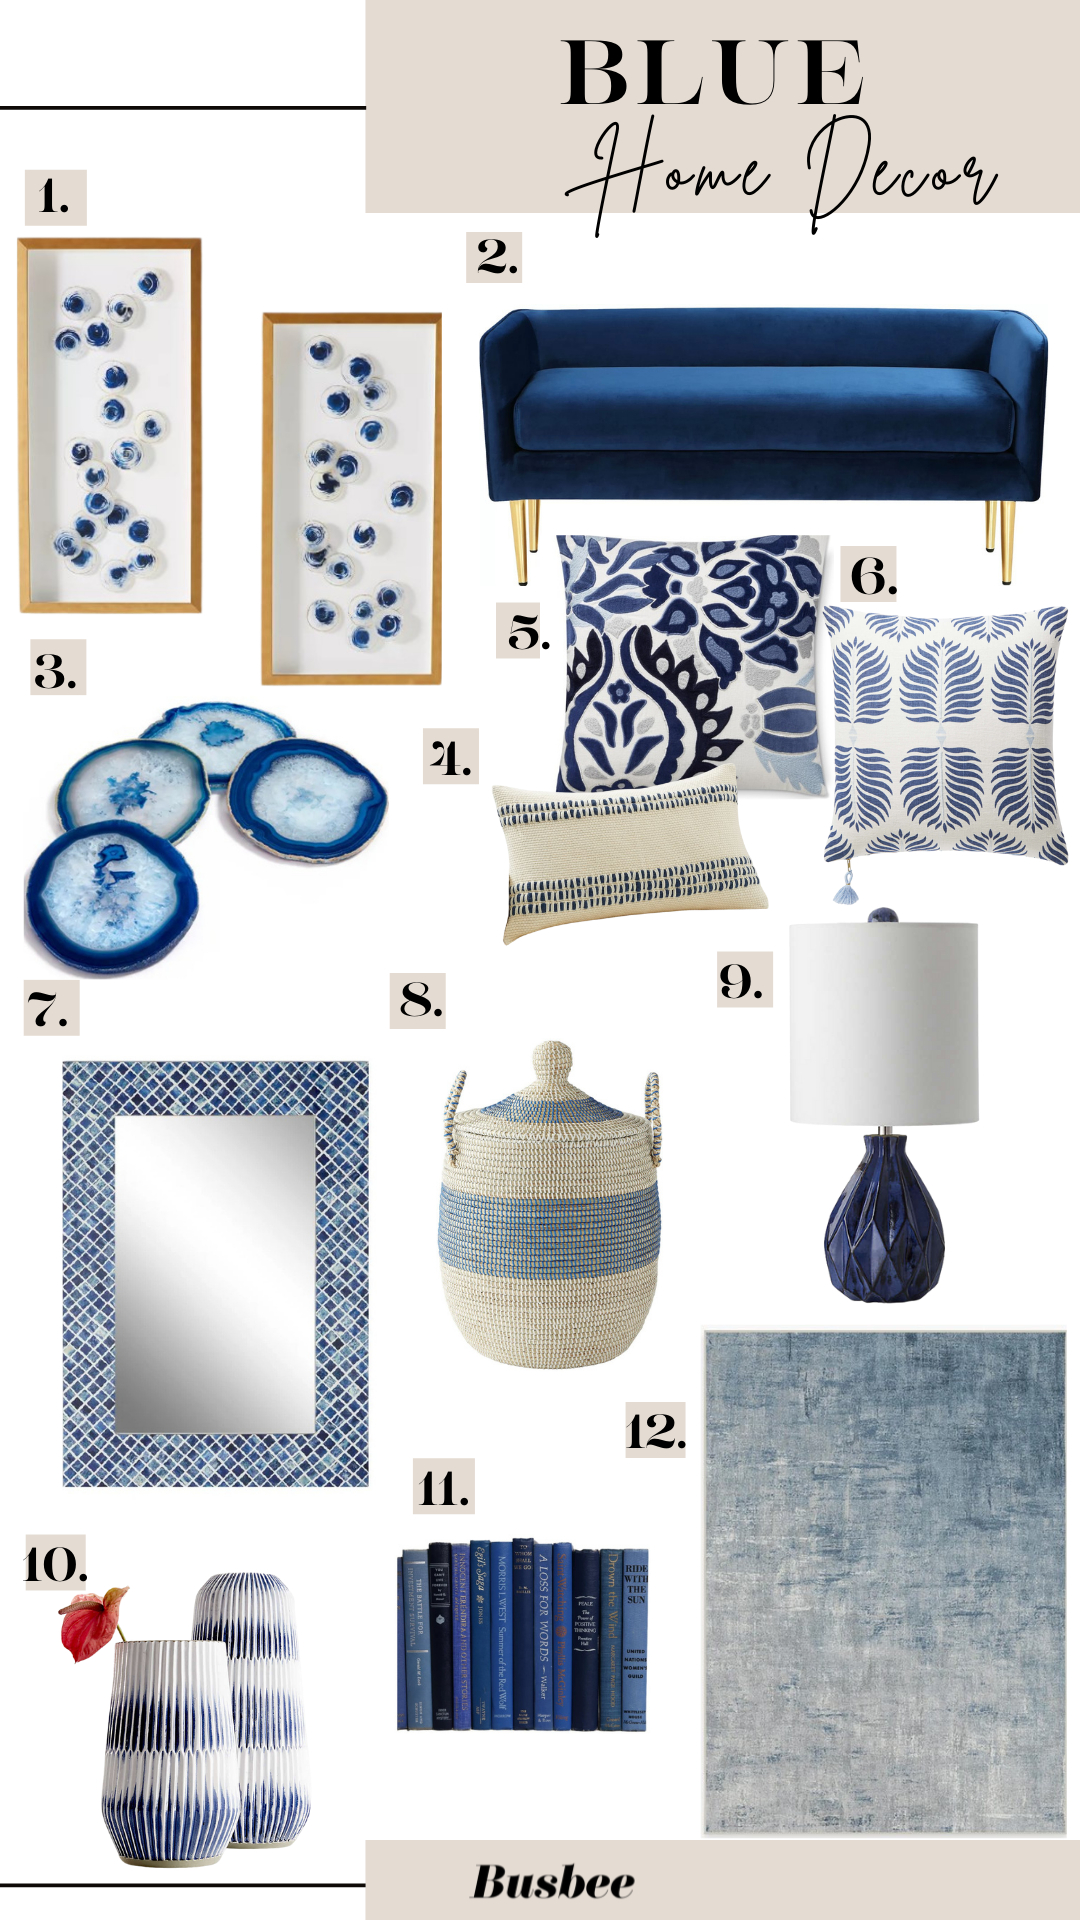 blue home decor, decorating with blue, home decor for spring, home decor for summer